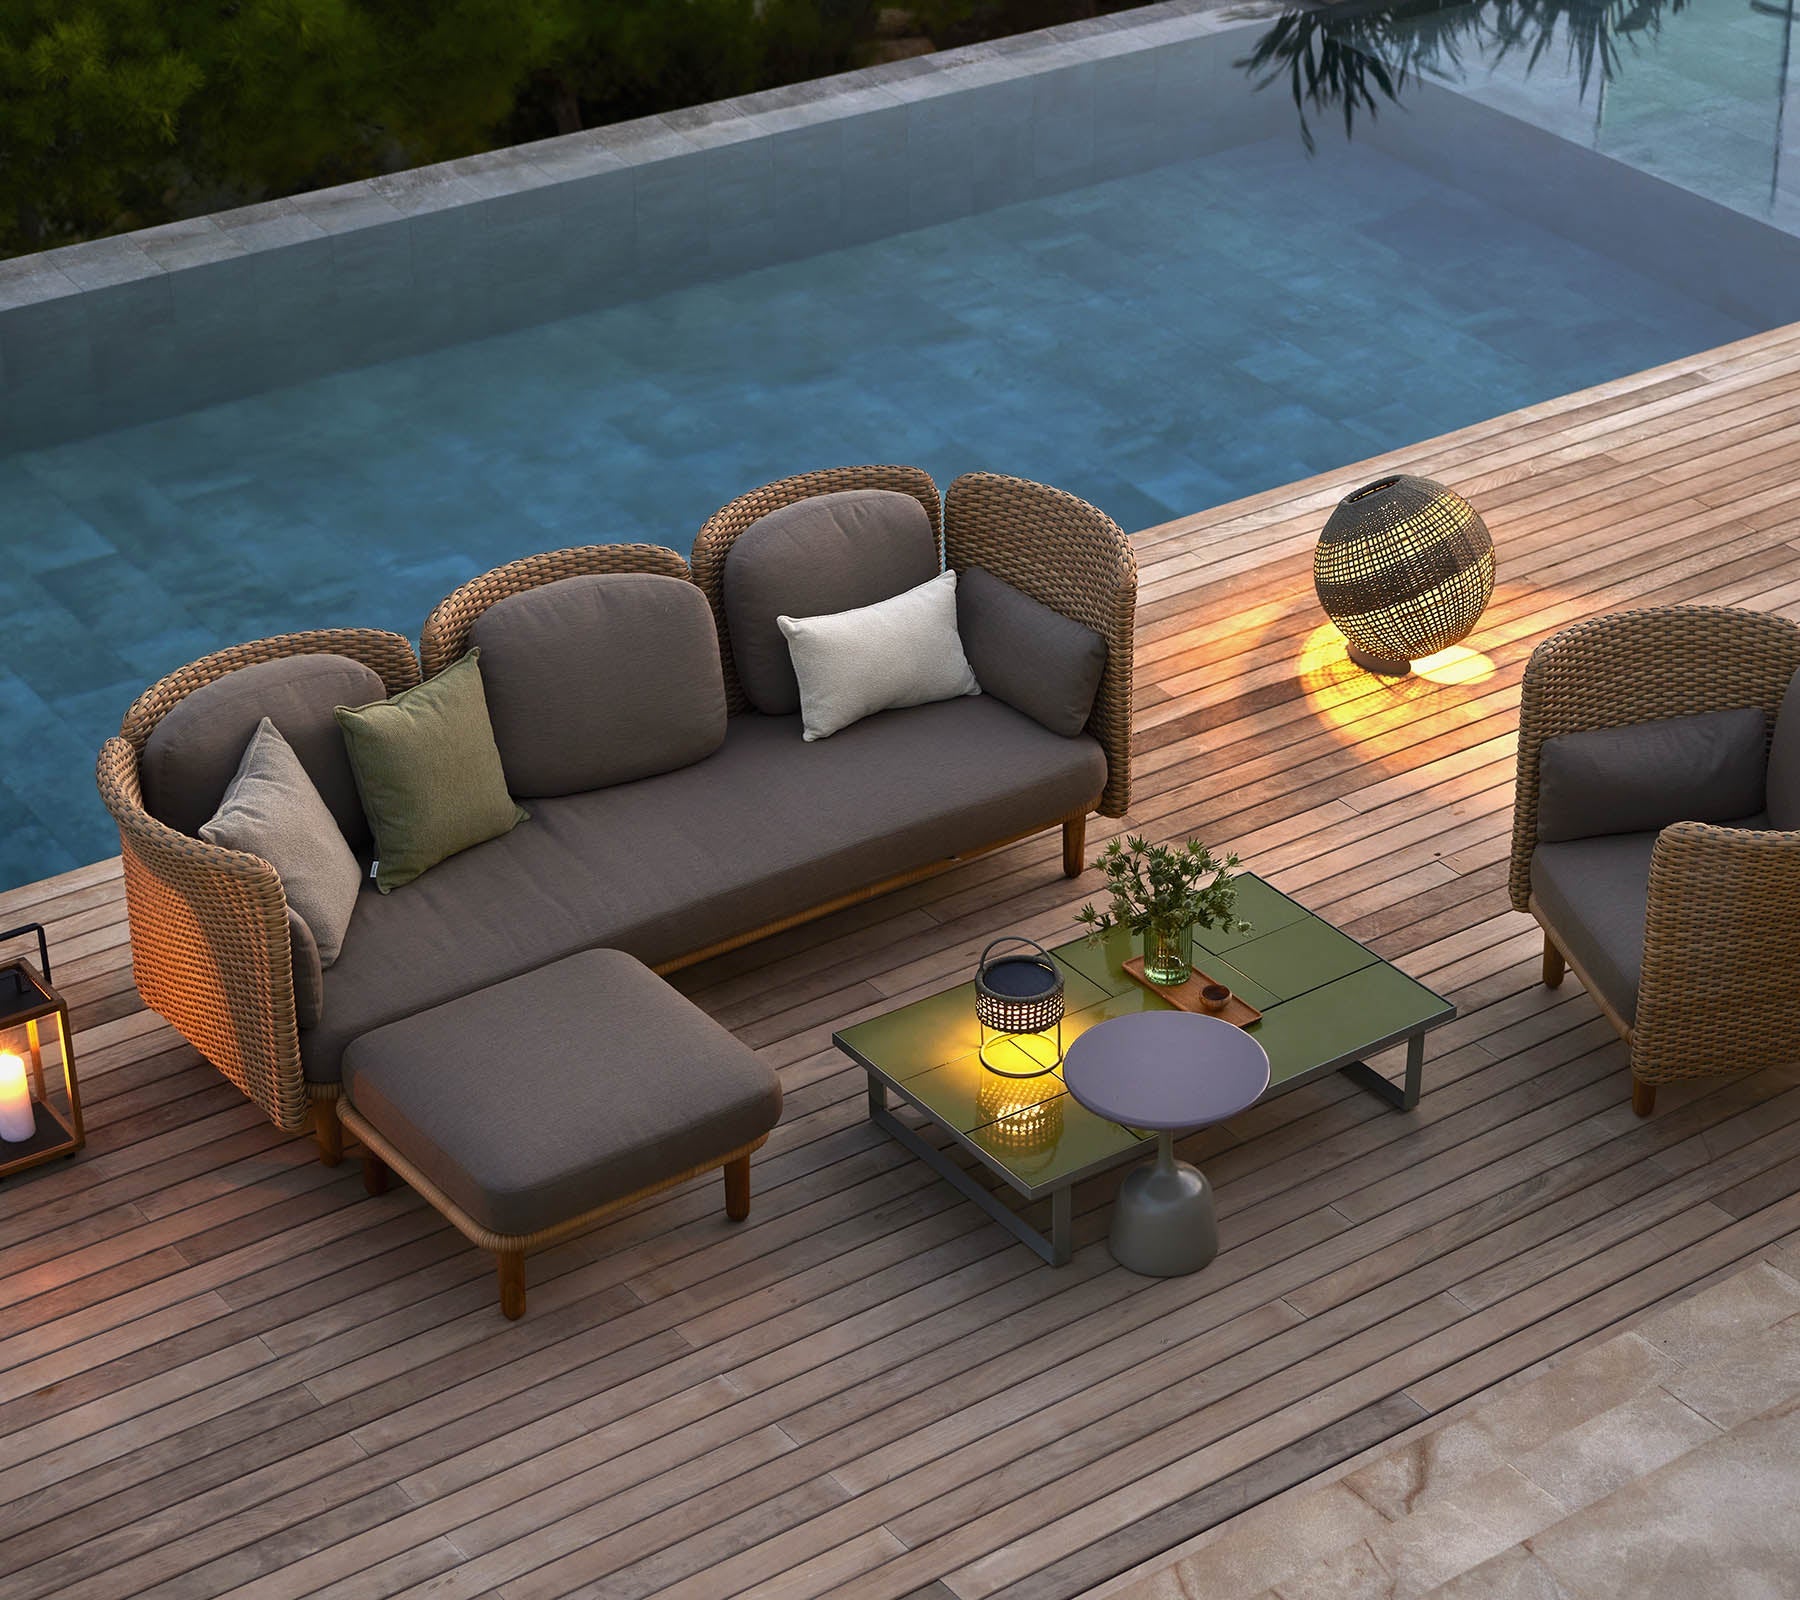 Boxhill's Illusion Outdoor Lamp | With Handle lifestyle image with Arch Sofa Collection at poolside